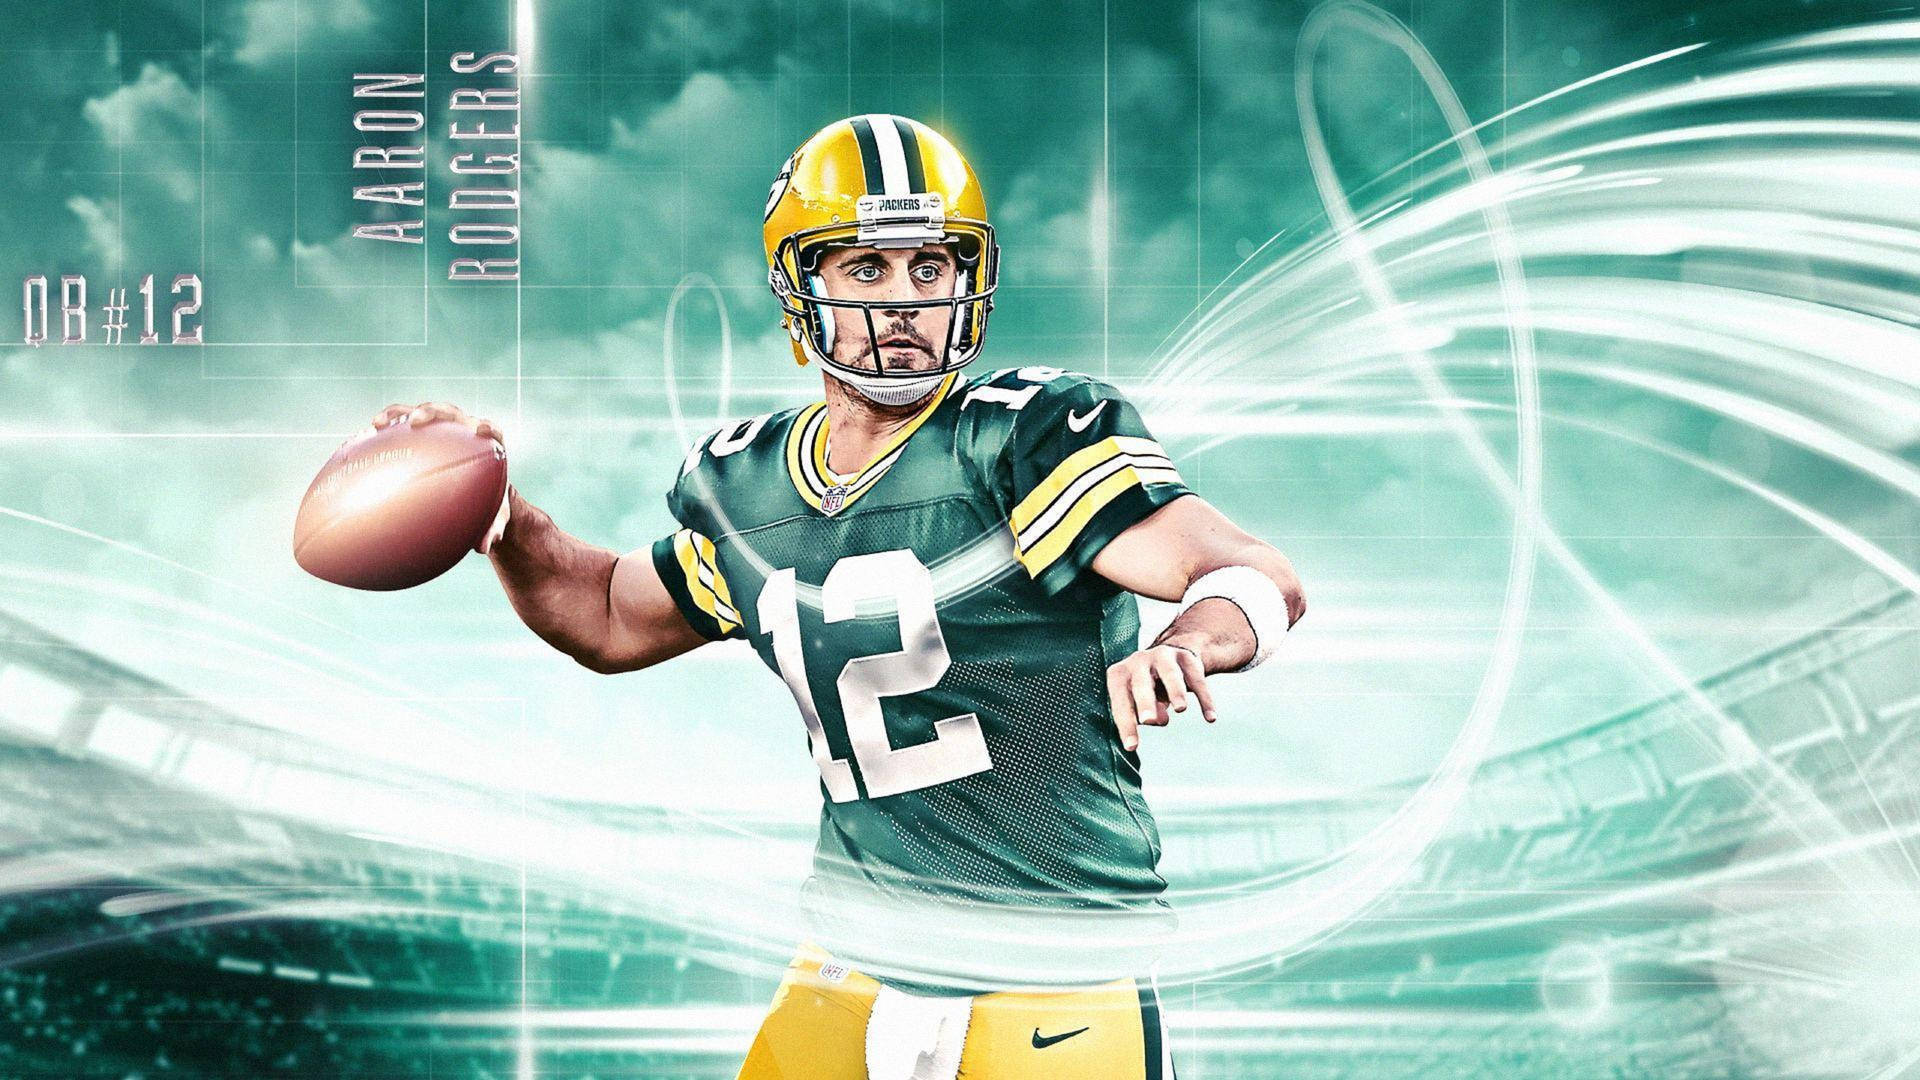 Aaron Rodgers 12 Packers Art Background